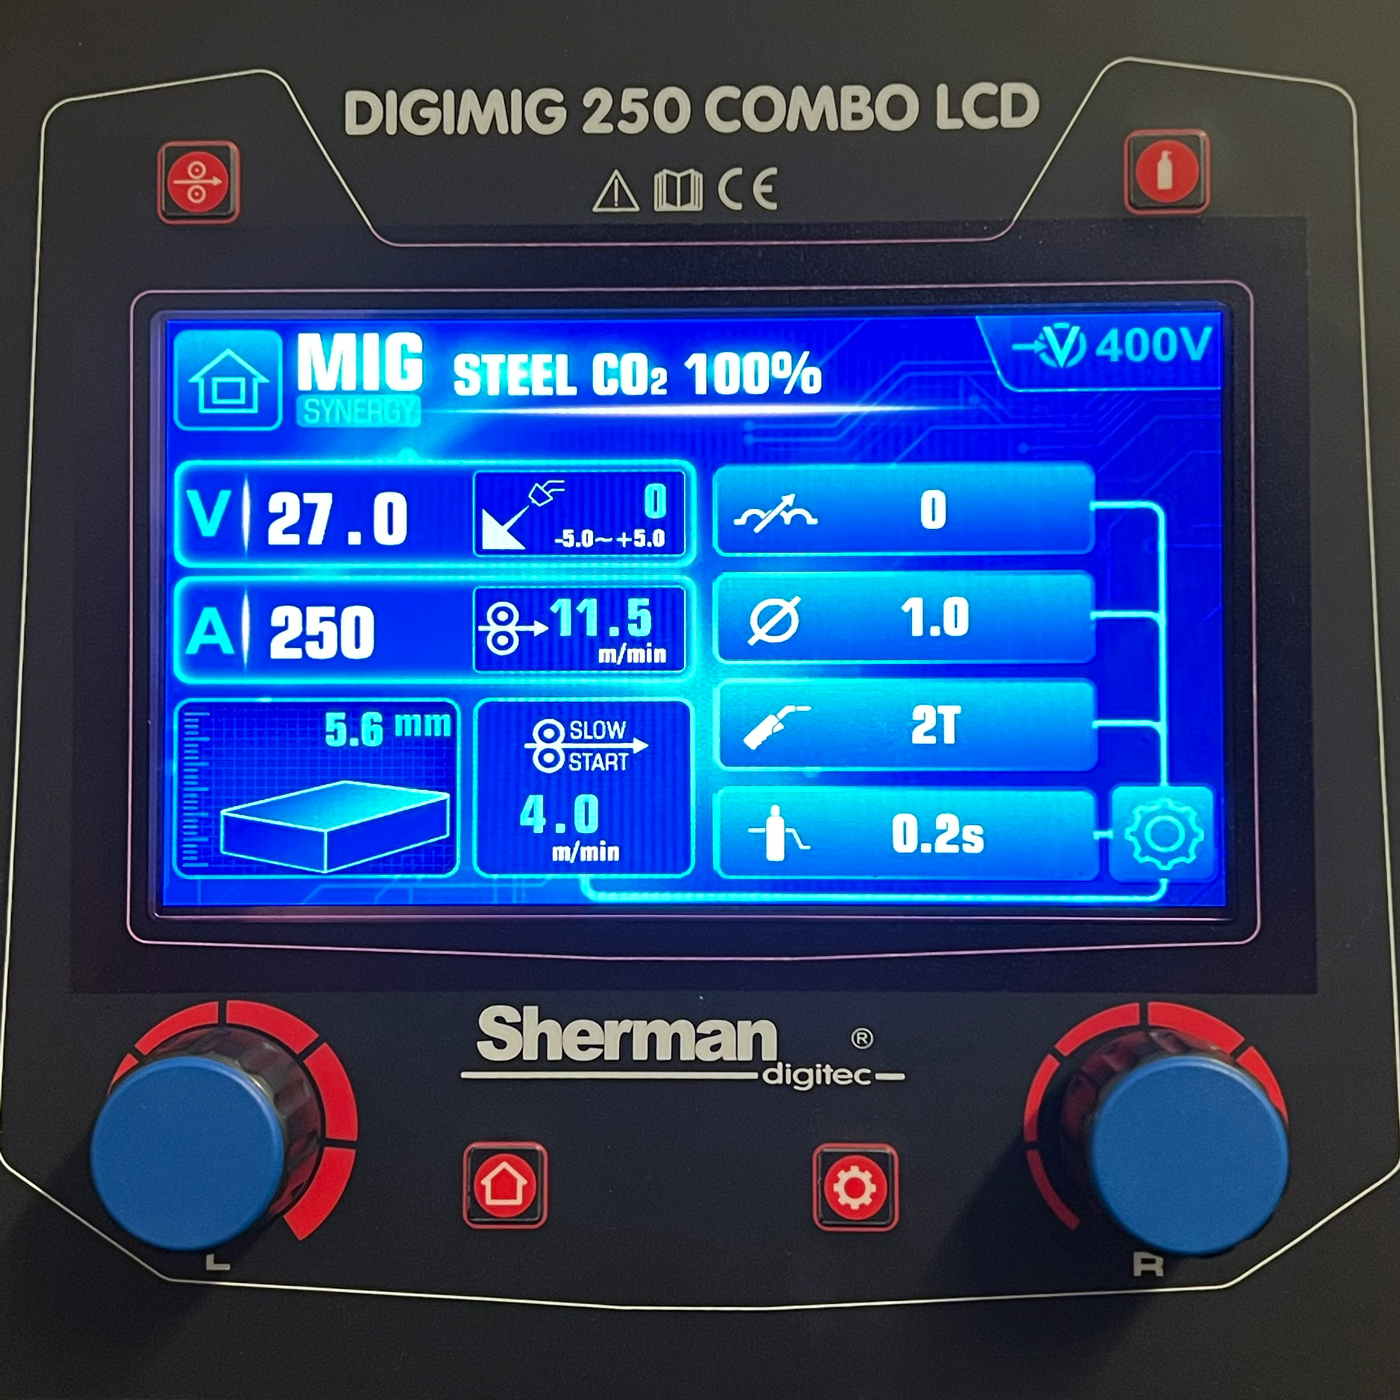 Sherman DIGIMIG 250 COMBO LCD – SUPER NYHED